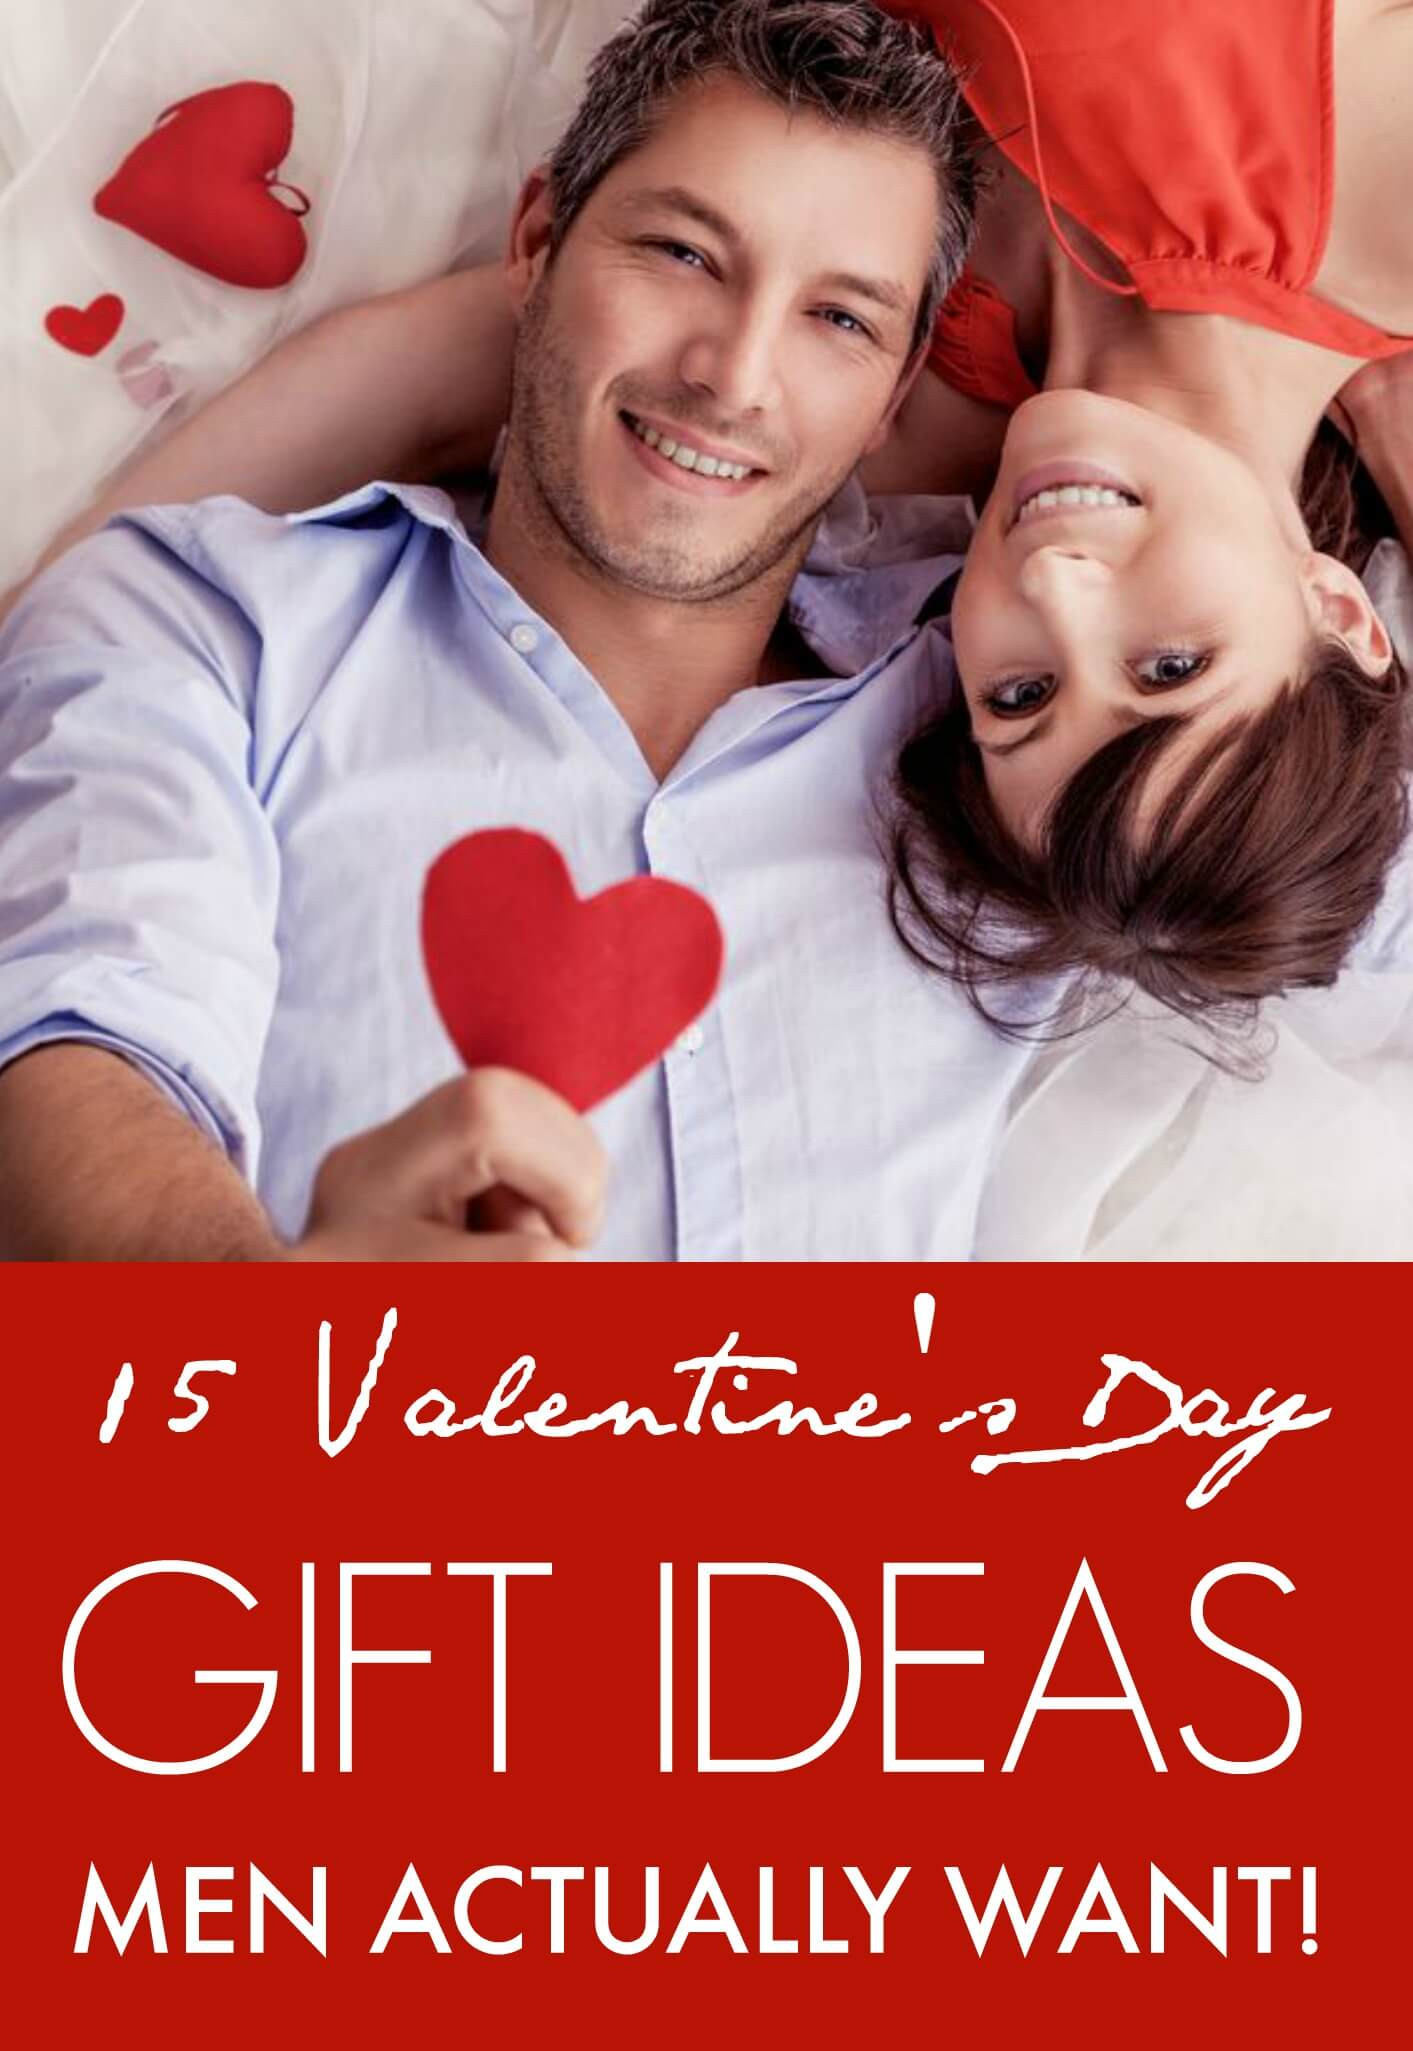 Male Valentines Day Gift Ideas
 15 Valentine’s Day Gift ideas Men Actually Want